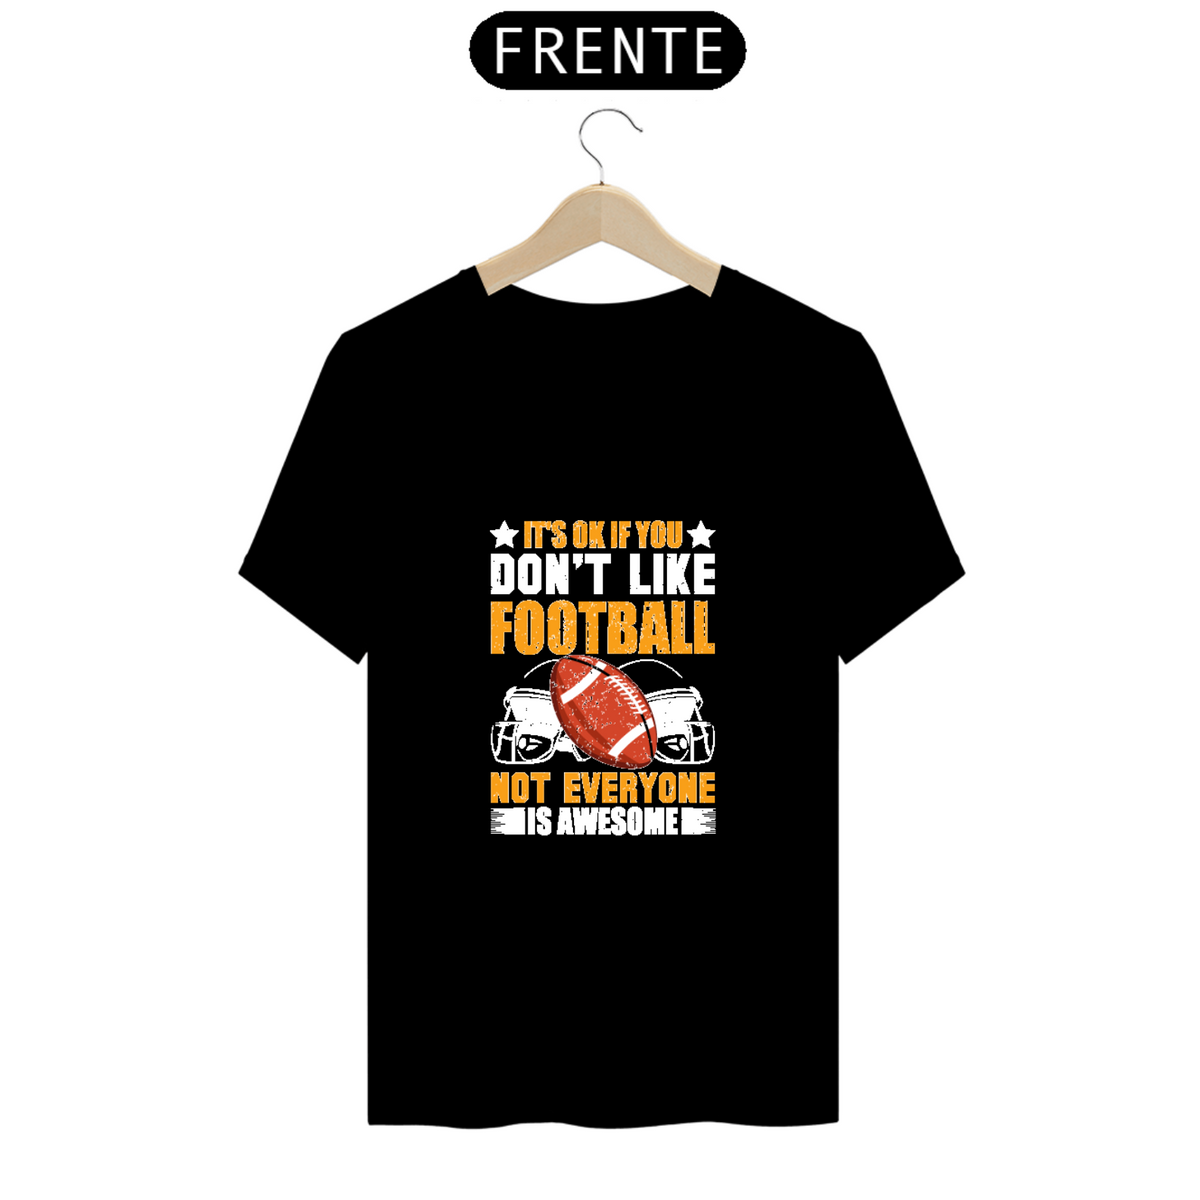 Nome do produto: T-Shirt Prime - Not Everyone is Awesome